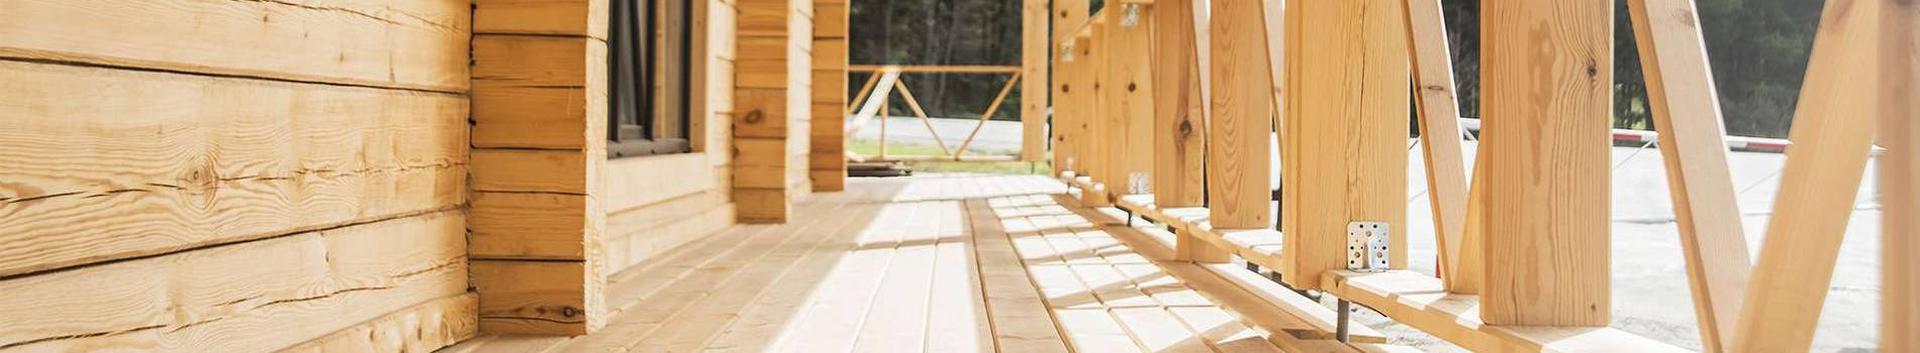 Saunas, cabins and offices all handcrafted combining centuries-old shingle technology with modern knowledge and craftsmanship.